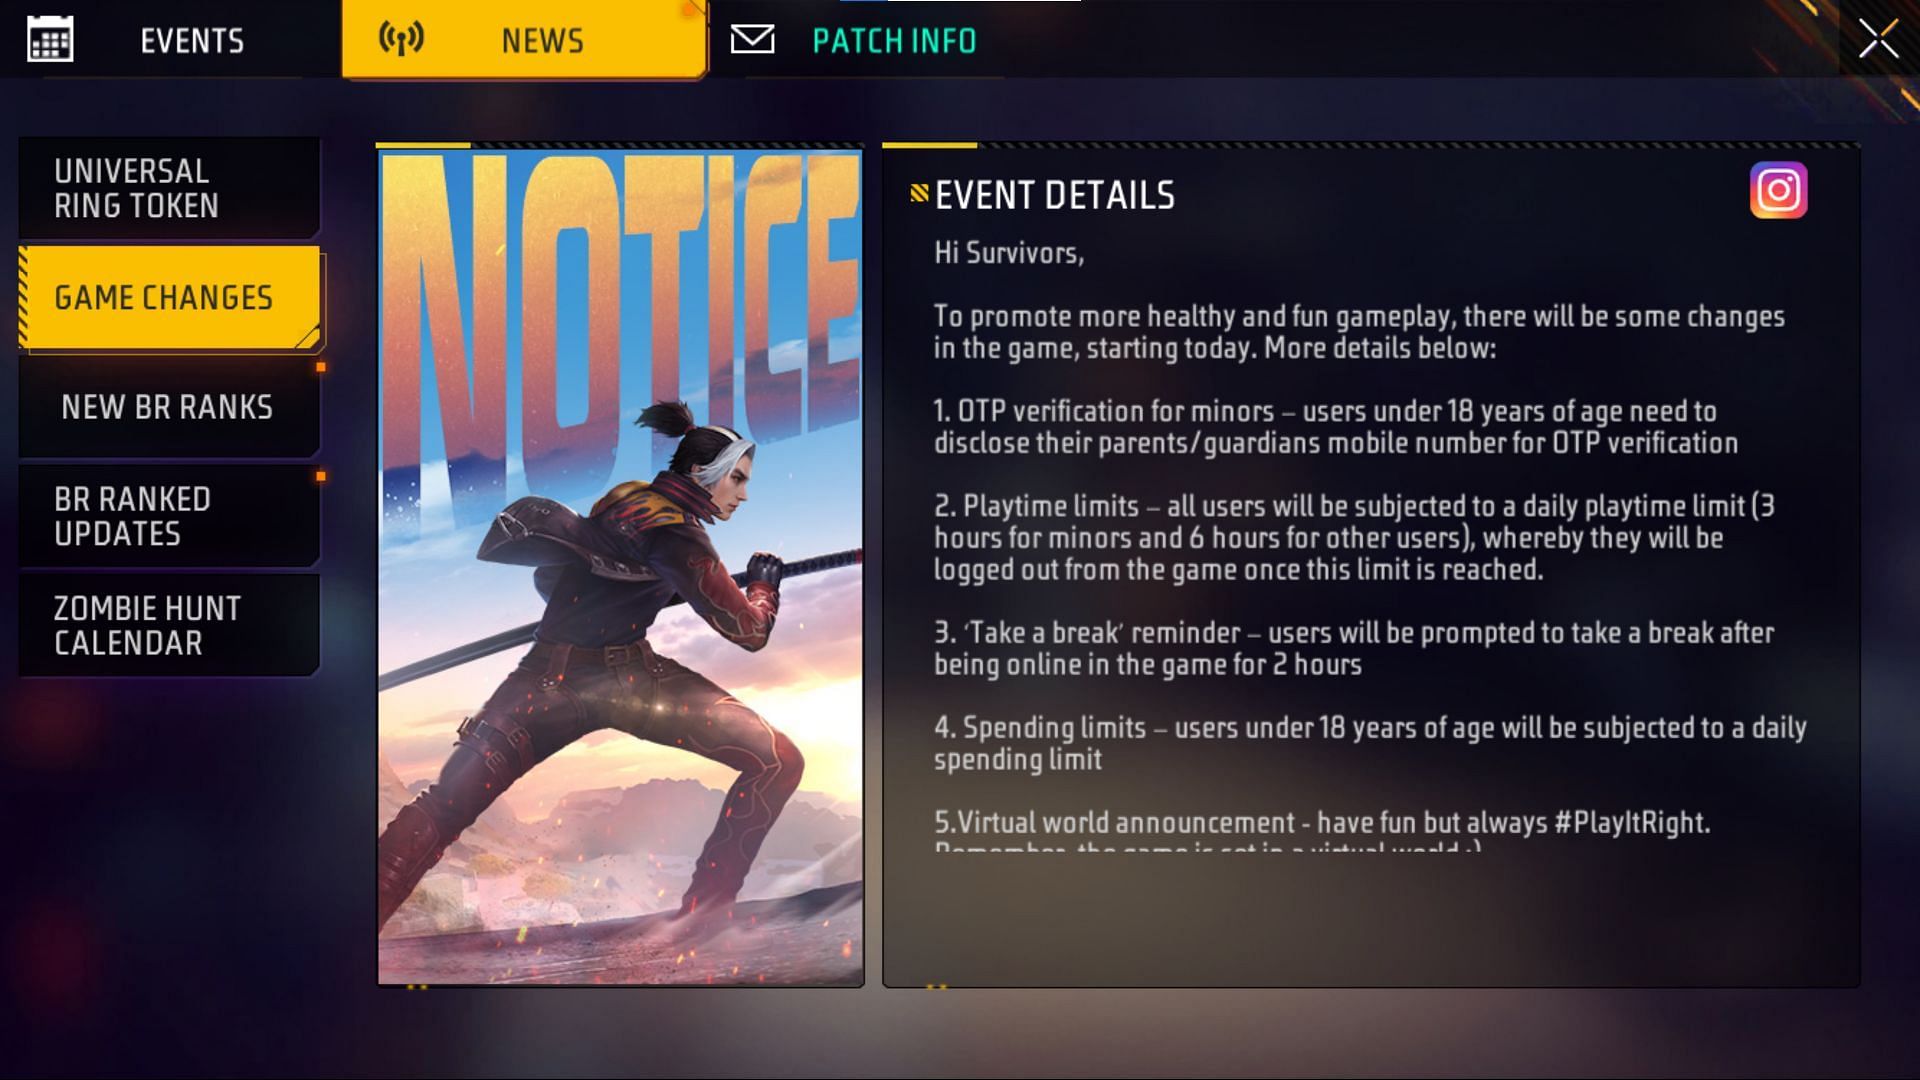 Several changes are going to take place with the launch of the game (Image via Garena)